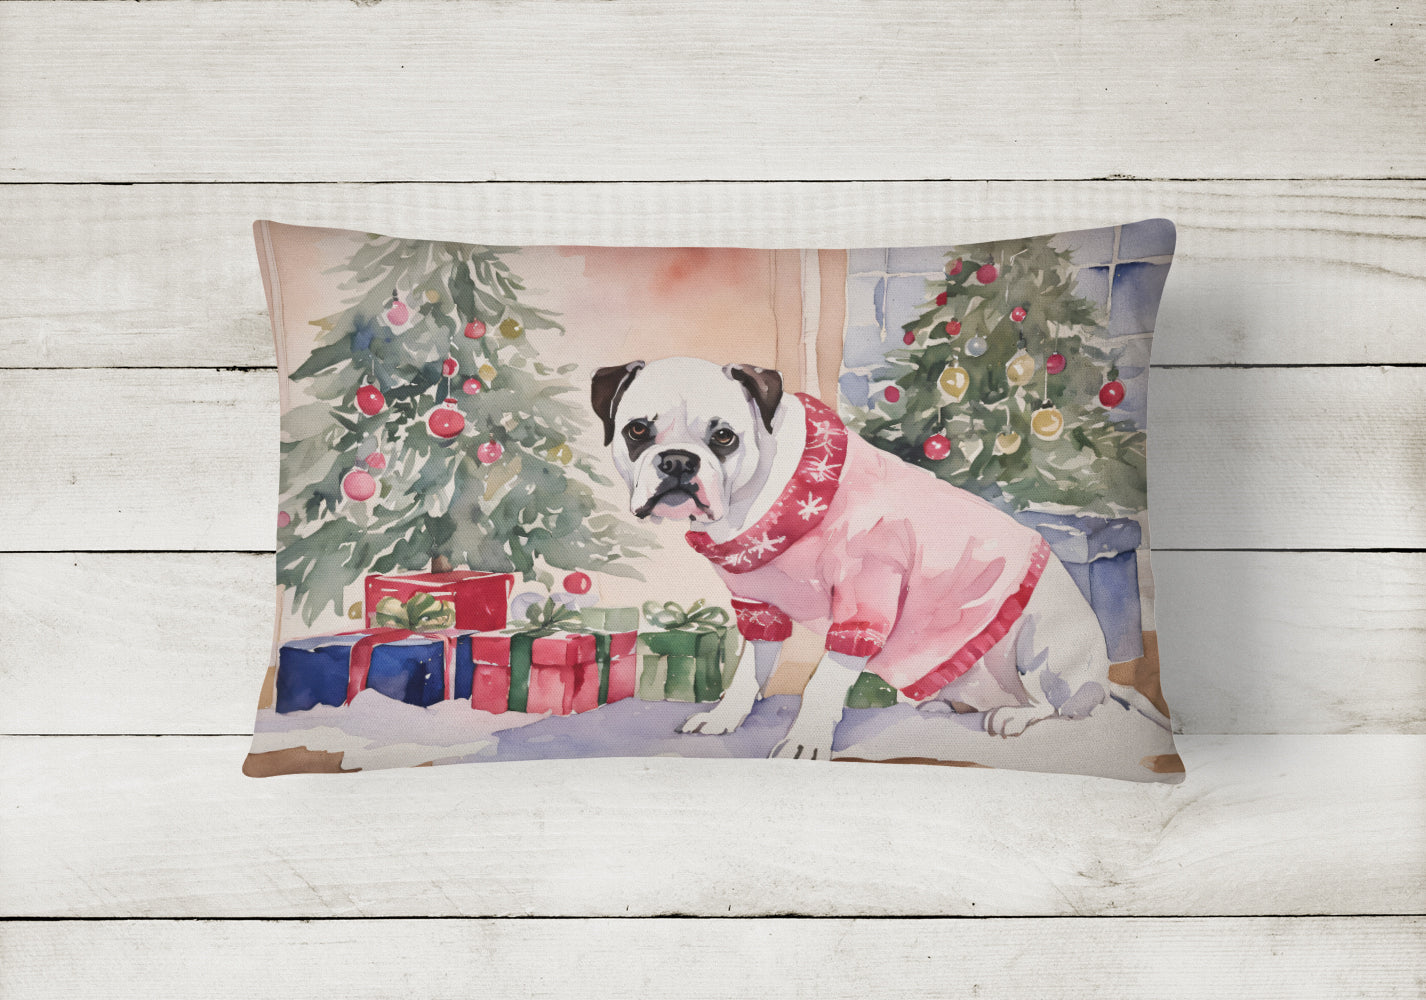 Buy this White Boxer Christmas Fabric Decorative Pillow